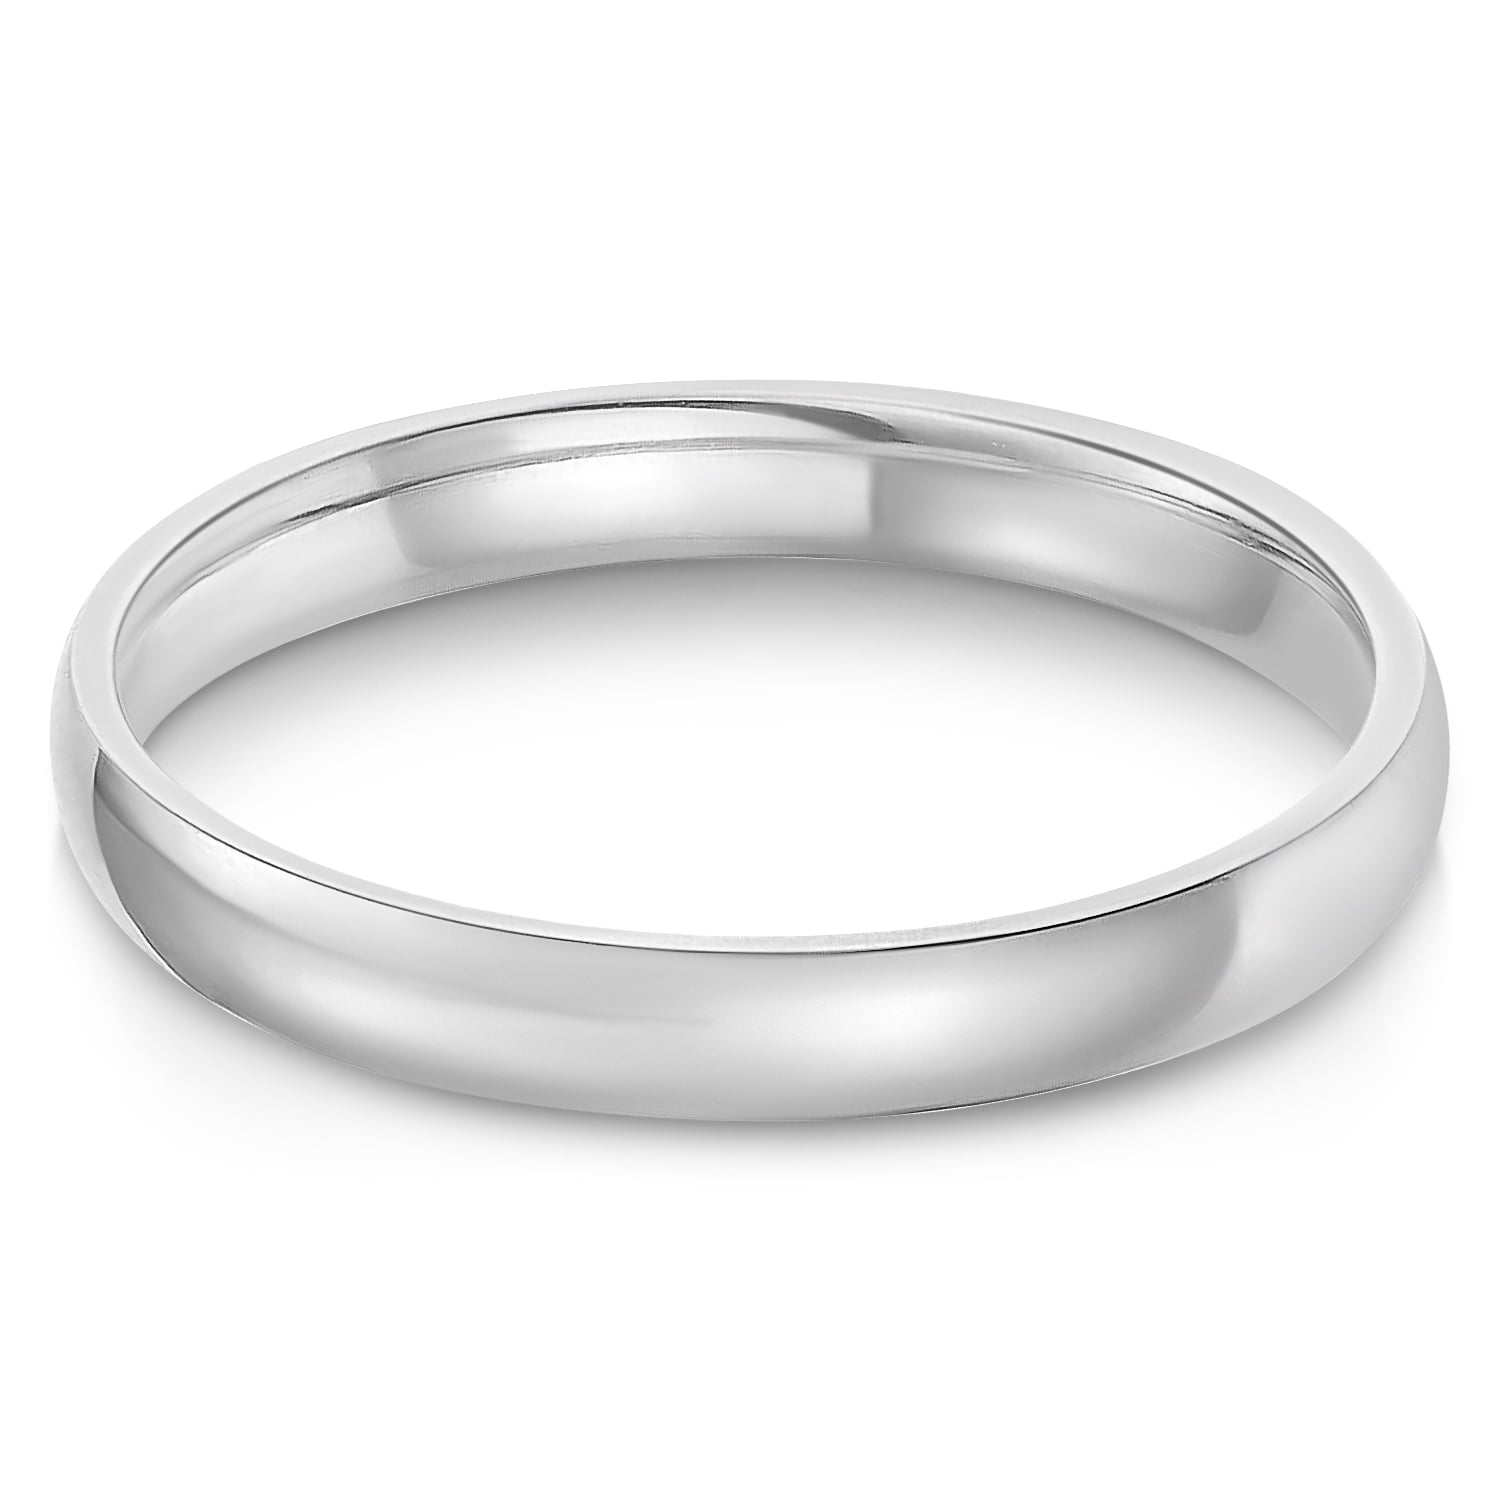 Ioka - 14k Solid White Gold 3mm Plain Comfort Fit Wedding Band - size 5